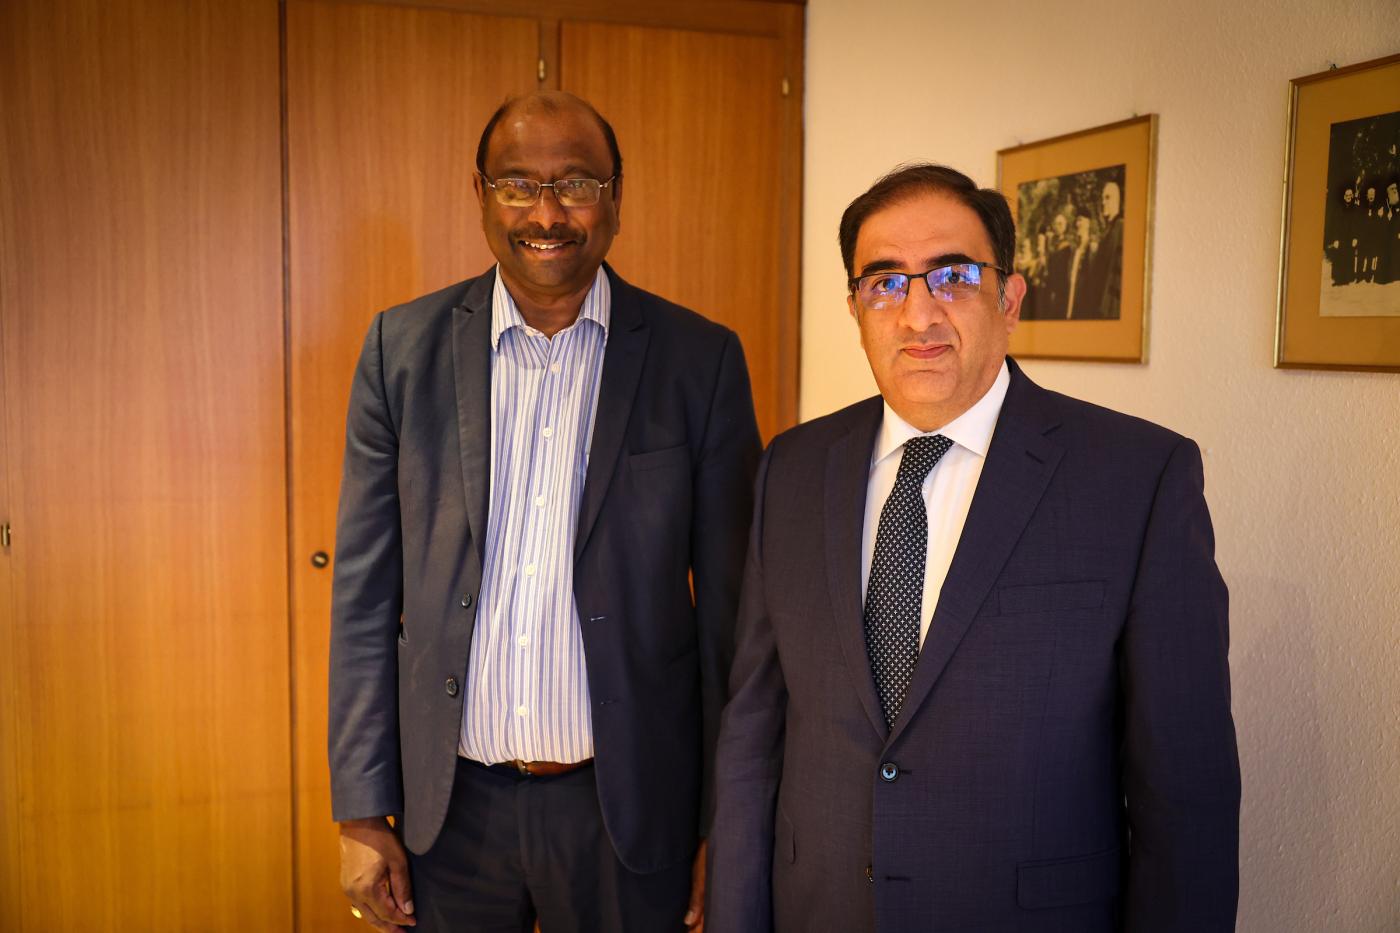 WCC general secretary Rev. Prof. Dr Jerry Pillay with the Ambassador Andranik Hovhannisyan, Permanent Mission of the Republic of Armenia to the UN Office, 28 August 2023, Photo: Grégoire de Fombelle/WCC